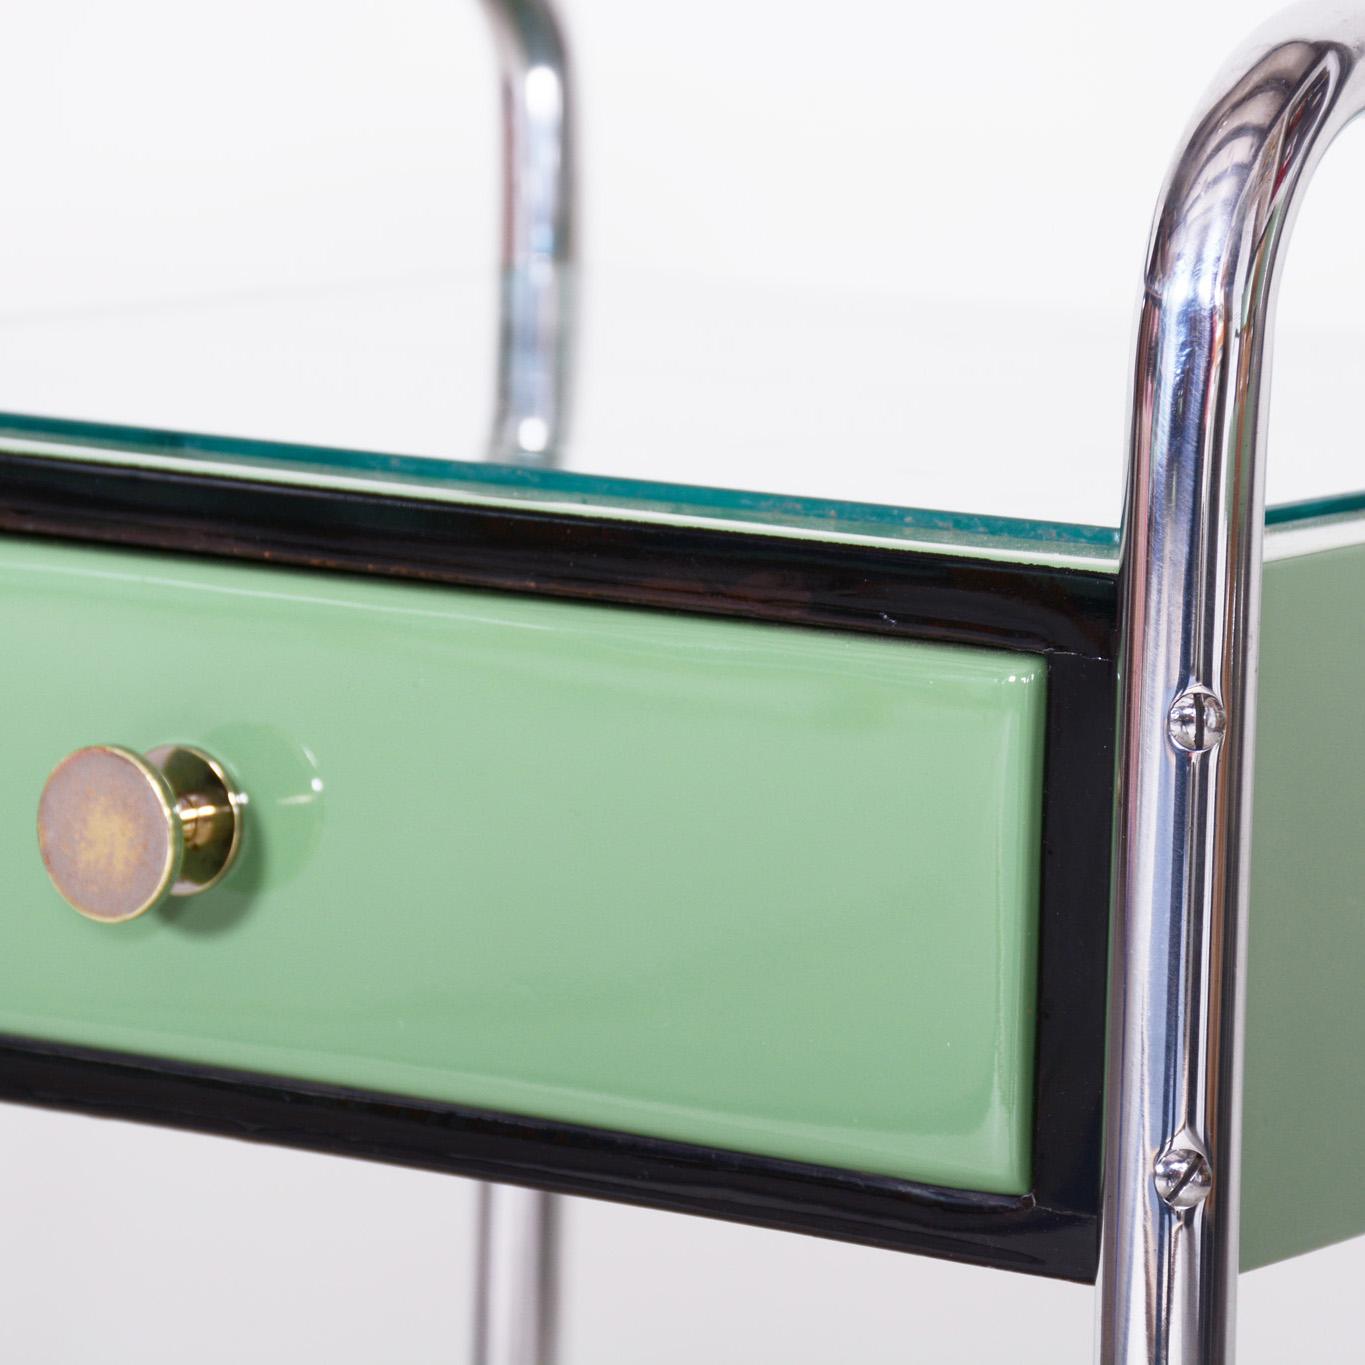 Restored Bauhaus Pair of Bed-Side Tables, Chrome-Plated Steel, Czech, 1930s For Sale 7